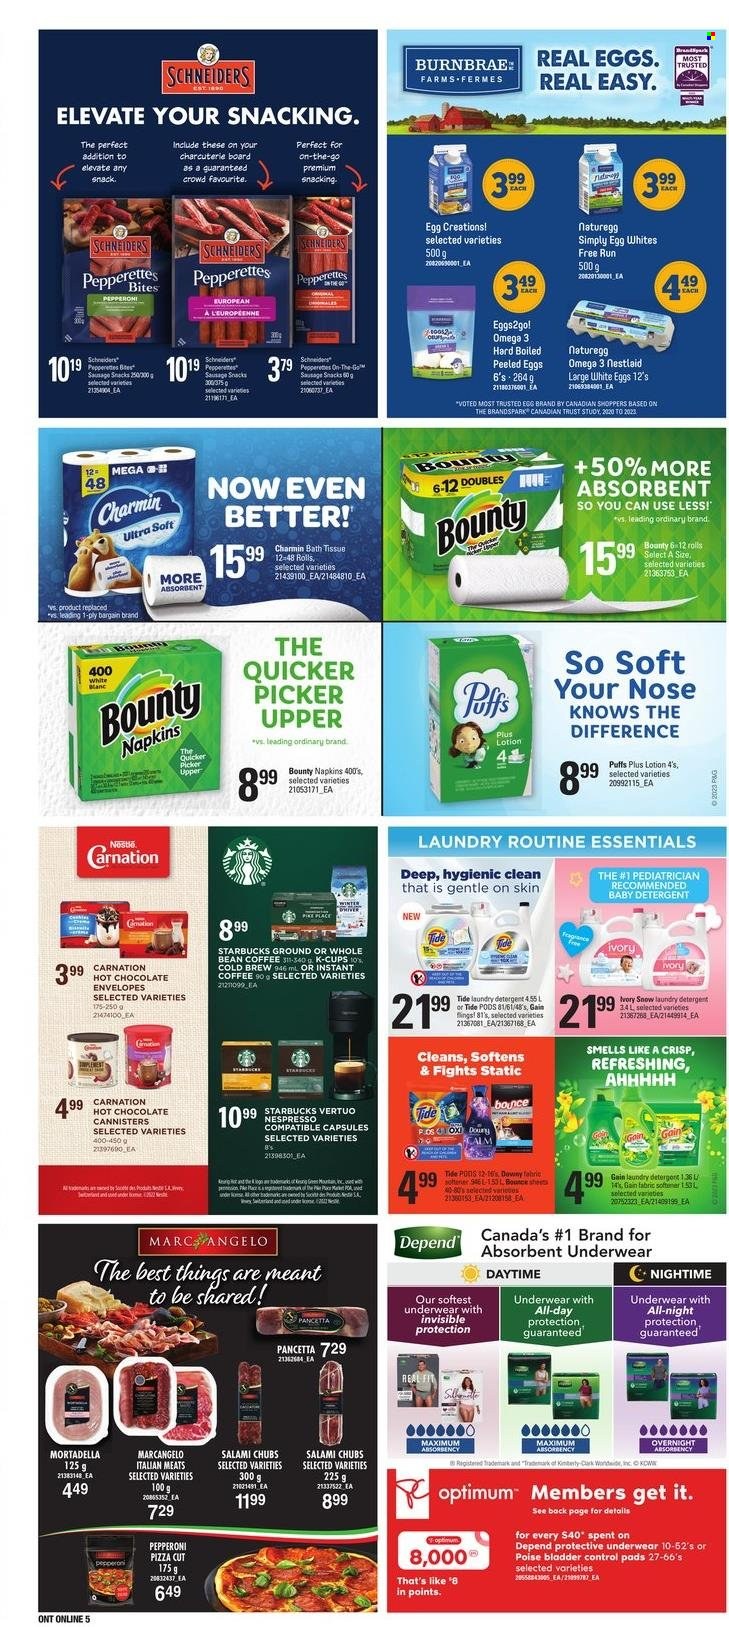 thumbnail - Zehrs Flyer - January 26, 2023 - February 01, 2023 - Sales products - Trust, puffs, peppers, pizza, mortadella, salami, sausage, pepperoni, eggs, snack, Bounty, hot chocolate, coffee, instant coffee, Nespresso, coffee capsules, Starbucks, K-Cups, napkins, bath tissue, Charmin, Gain, Tide, fabric softener, laundry detergent, Bounce, Downy Laundry, fragrance, envelope, Optimum, Omega-3, detergent, Nestlé, pancetta. Page 13.